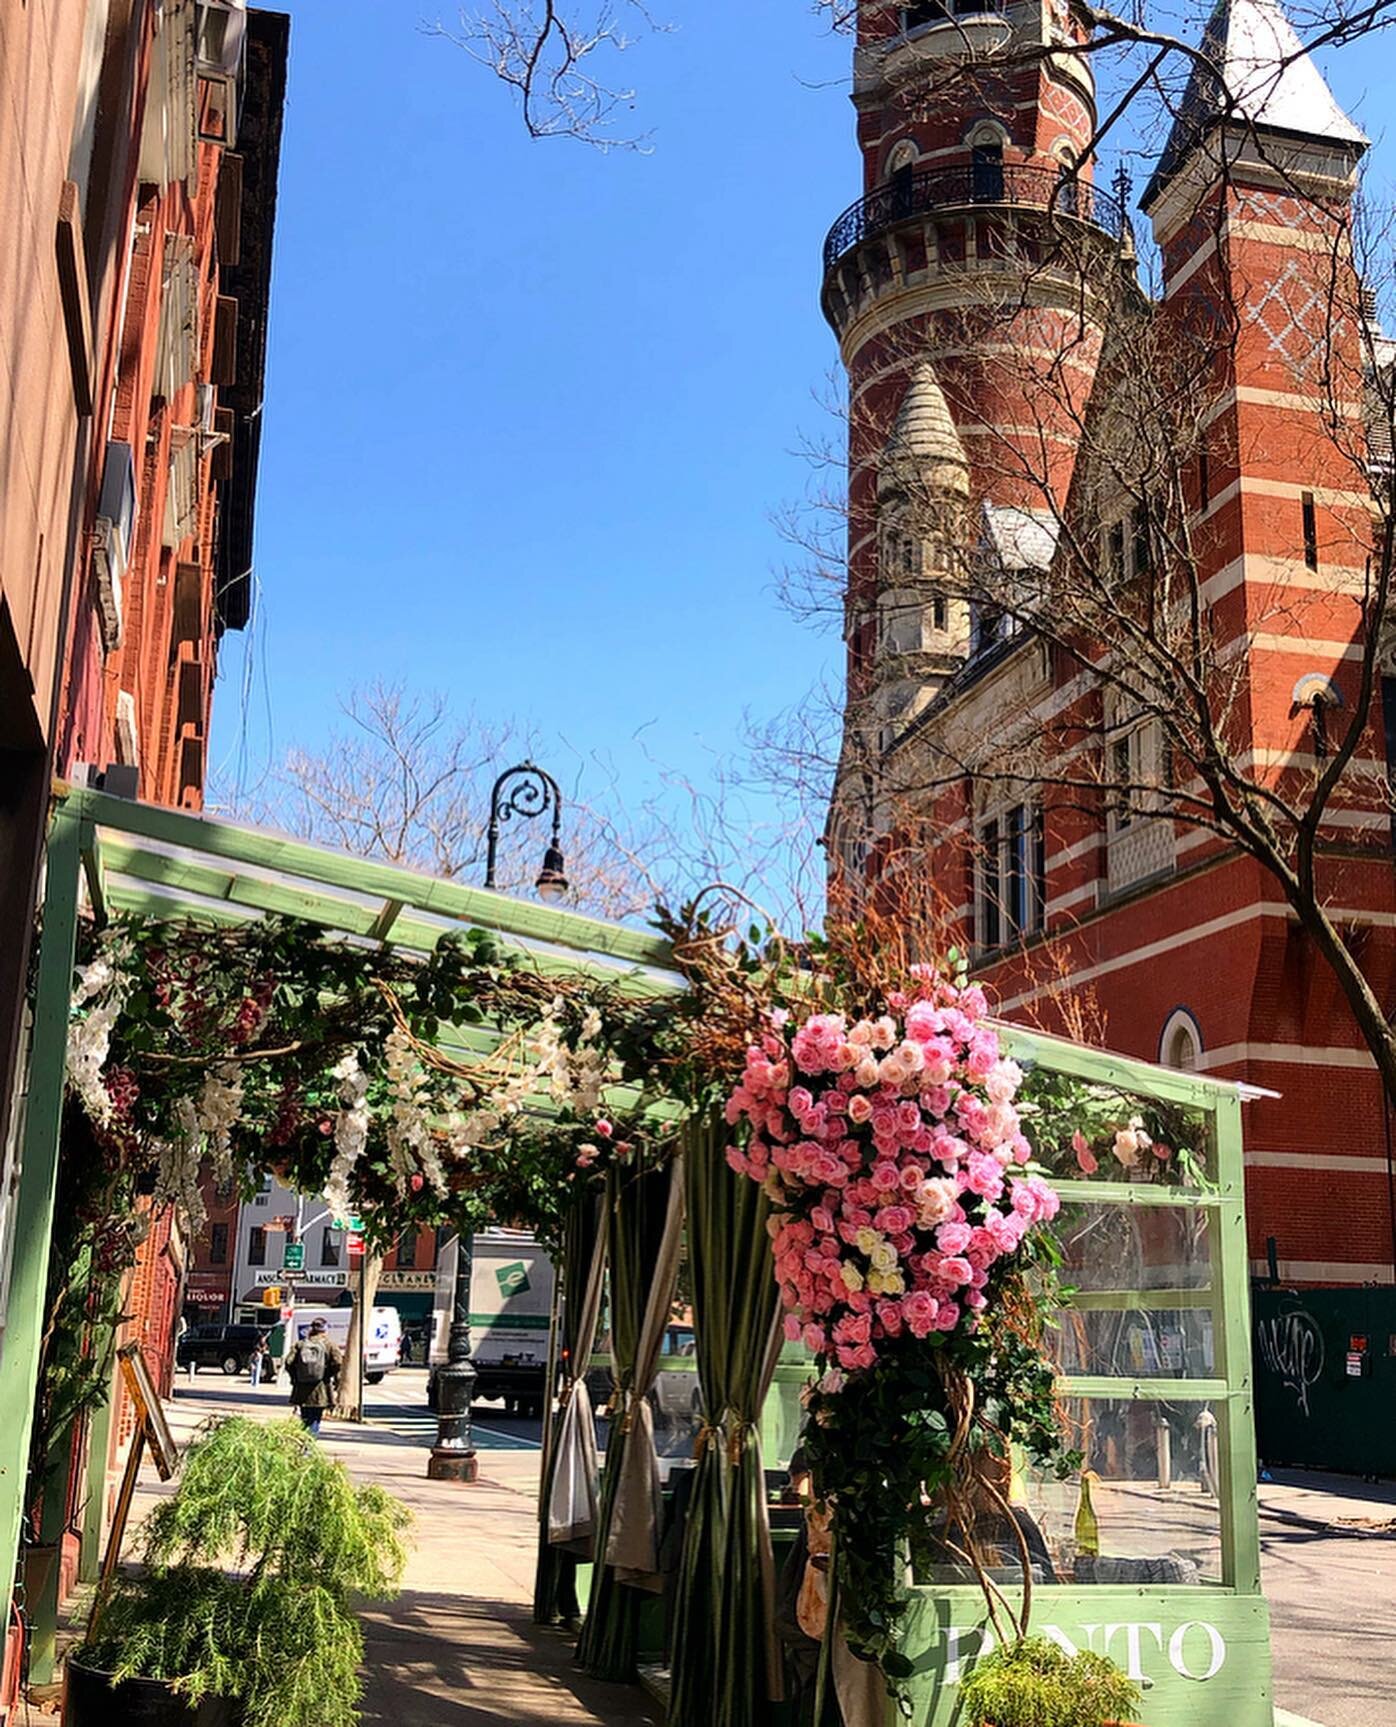 Spring has sprung in NYC! 🌷 THANK GOD 😂 Winter was rough here, with most of the city basically shut down for the last six months. But the vibes are strong now, and it feels pretty darn good to be back in action here. 💐🌸💐 PLUS, I&rsquo;m getting 